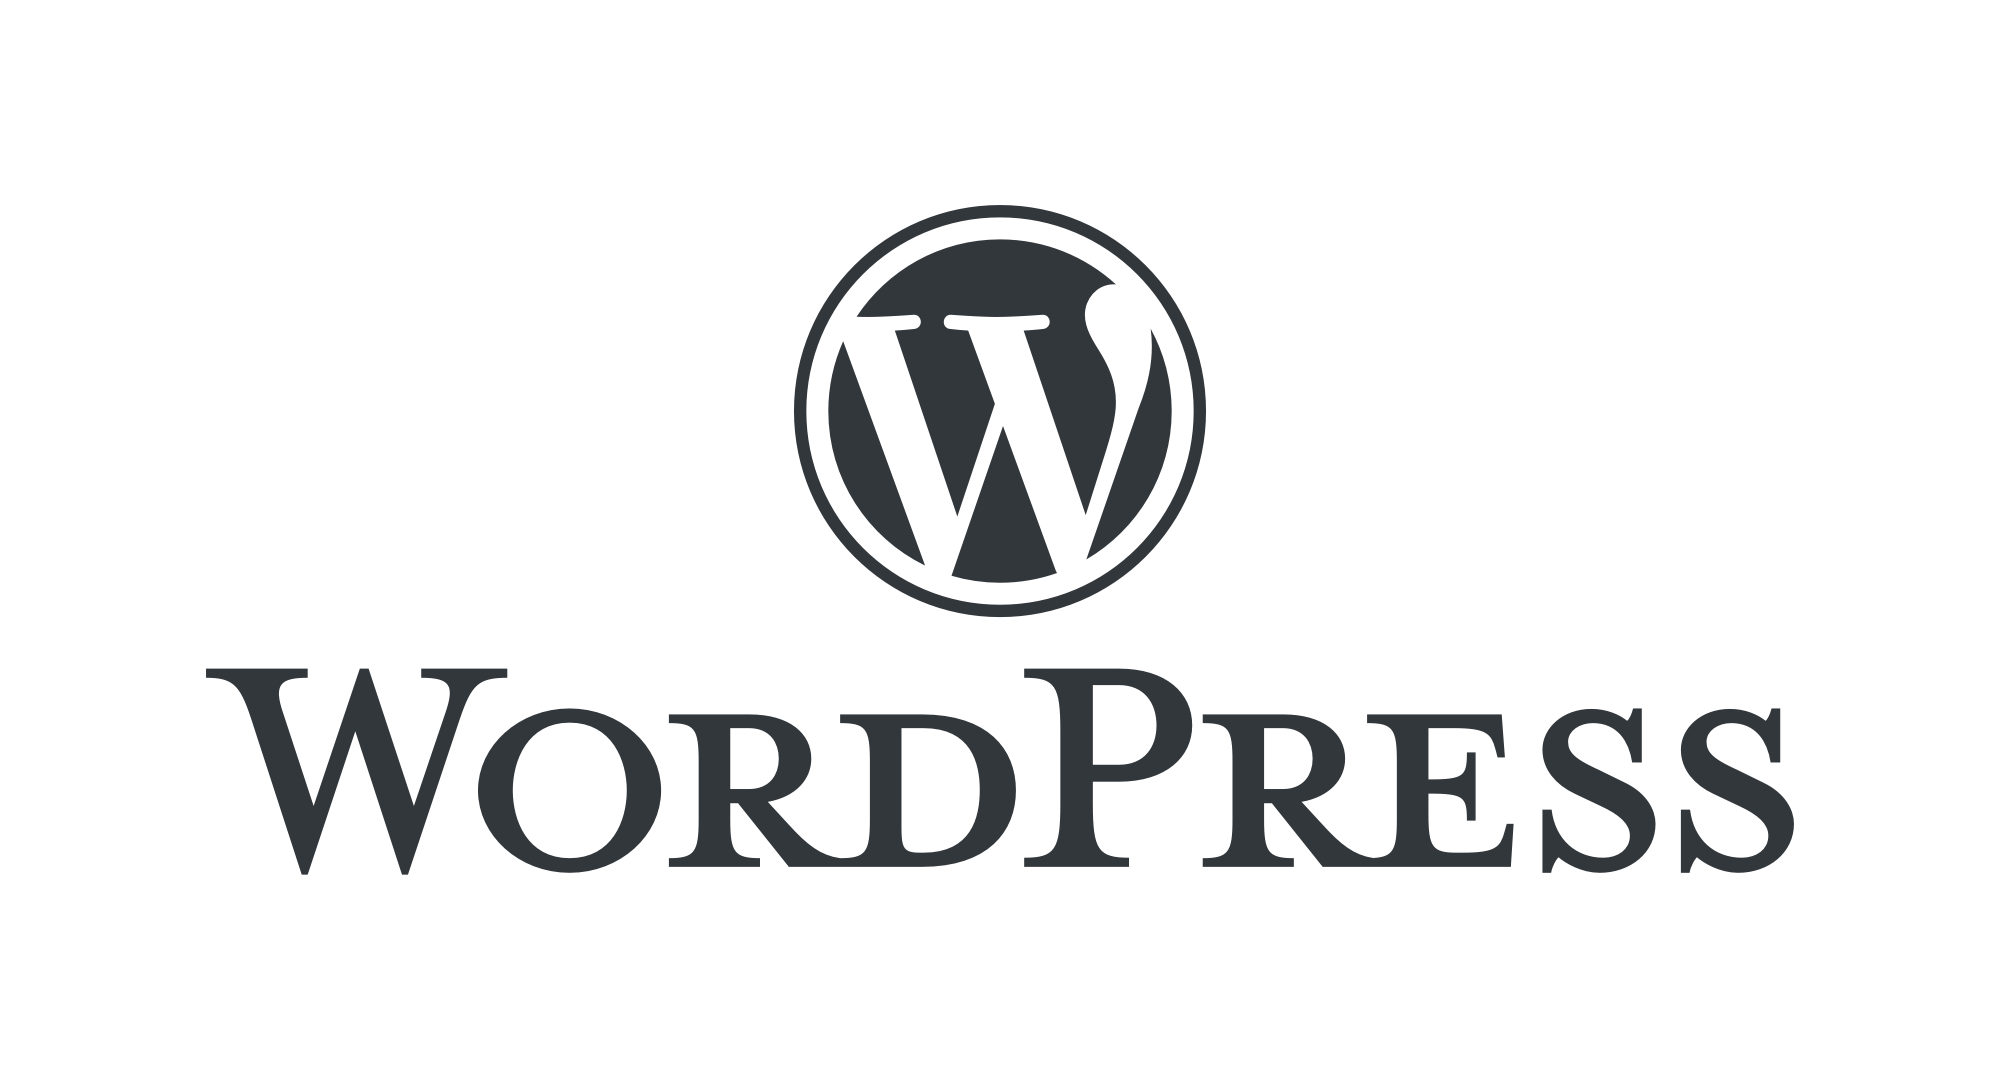 How To Check When WordPress Was Last Updated?